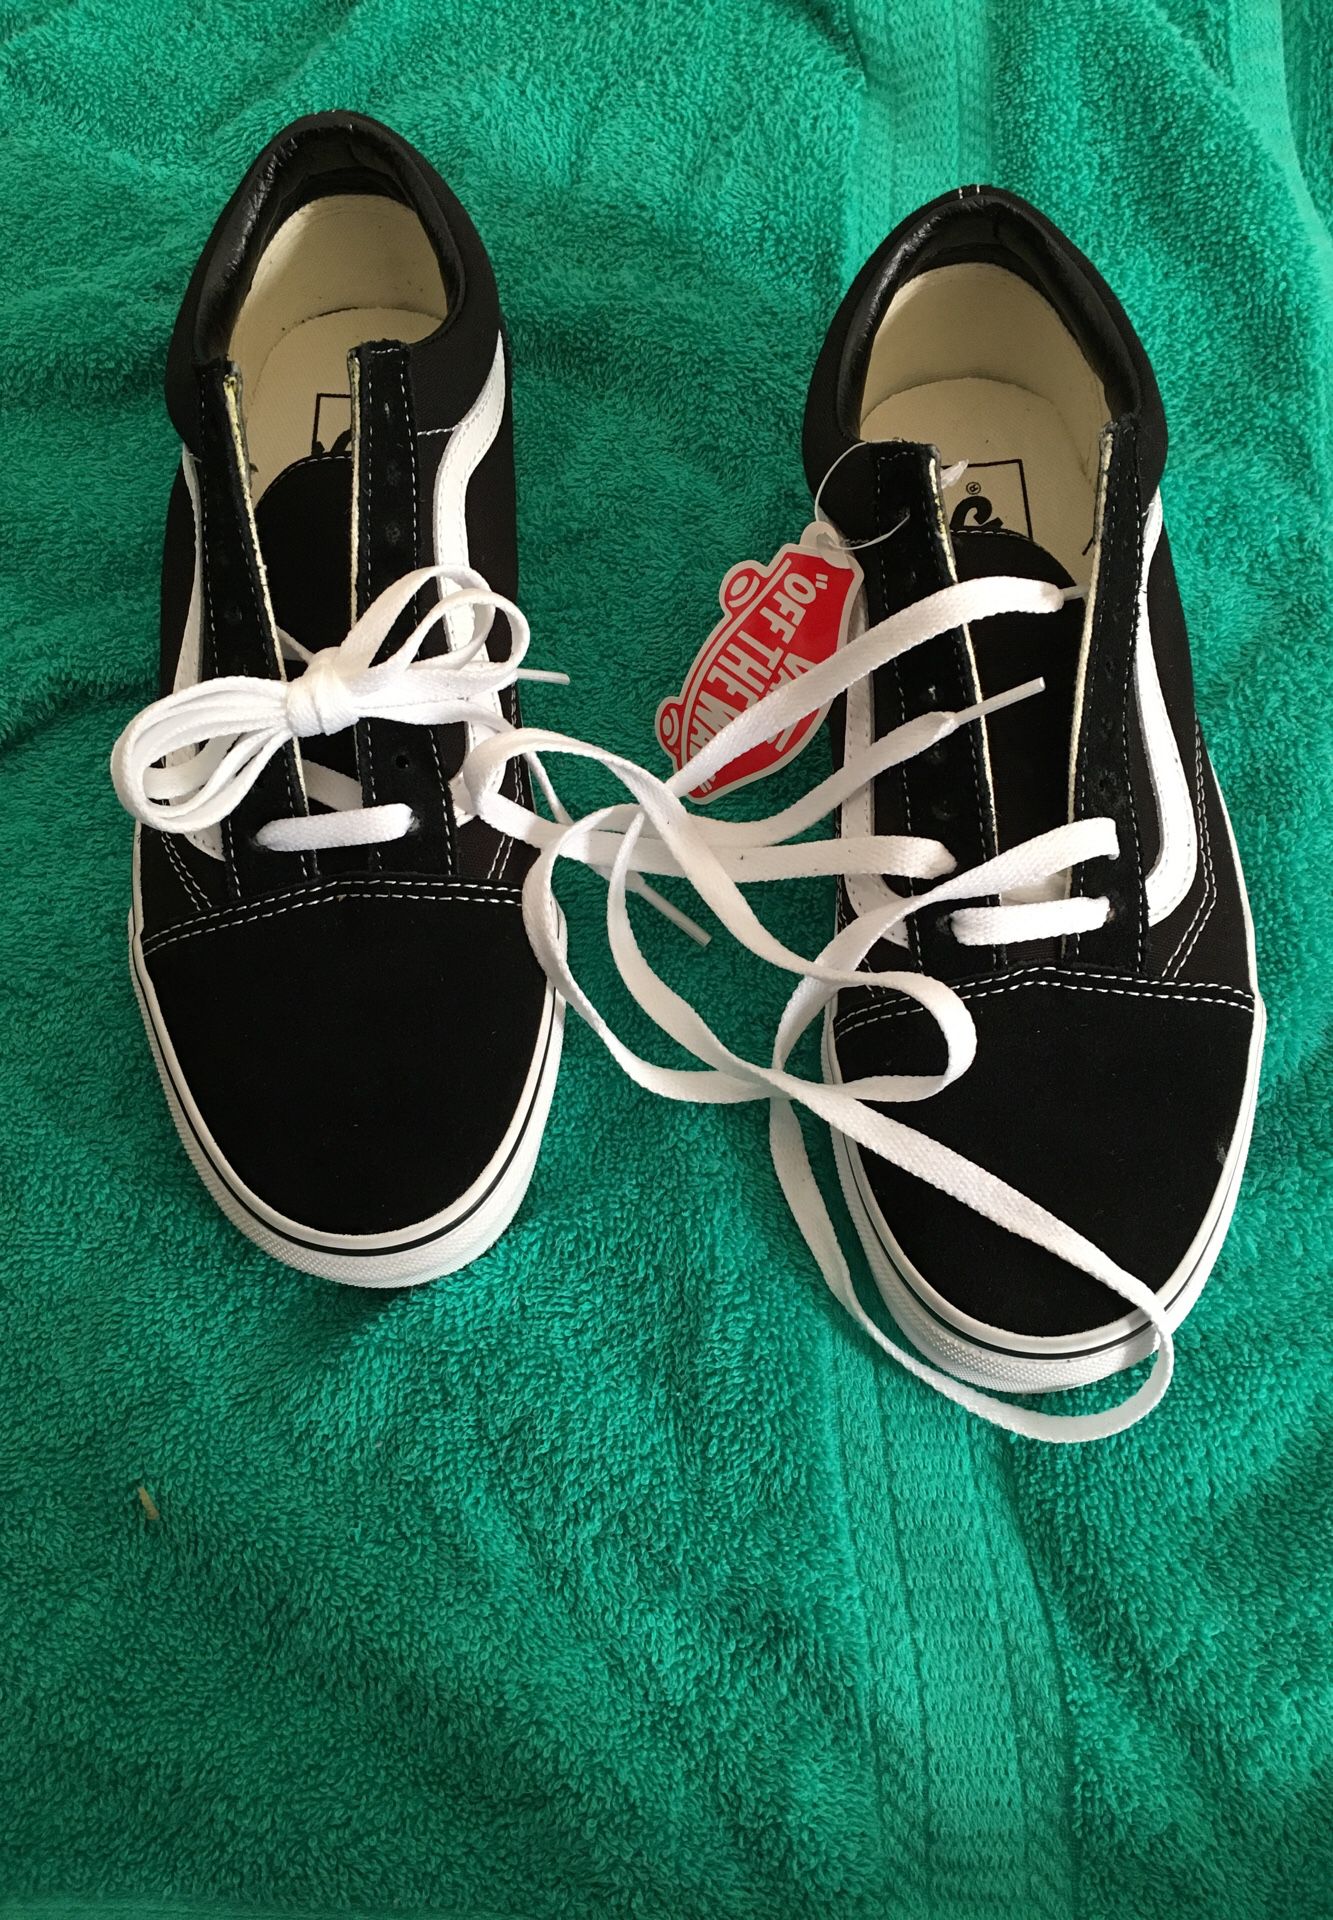 Black and white vans size 7.5men and size 9 women